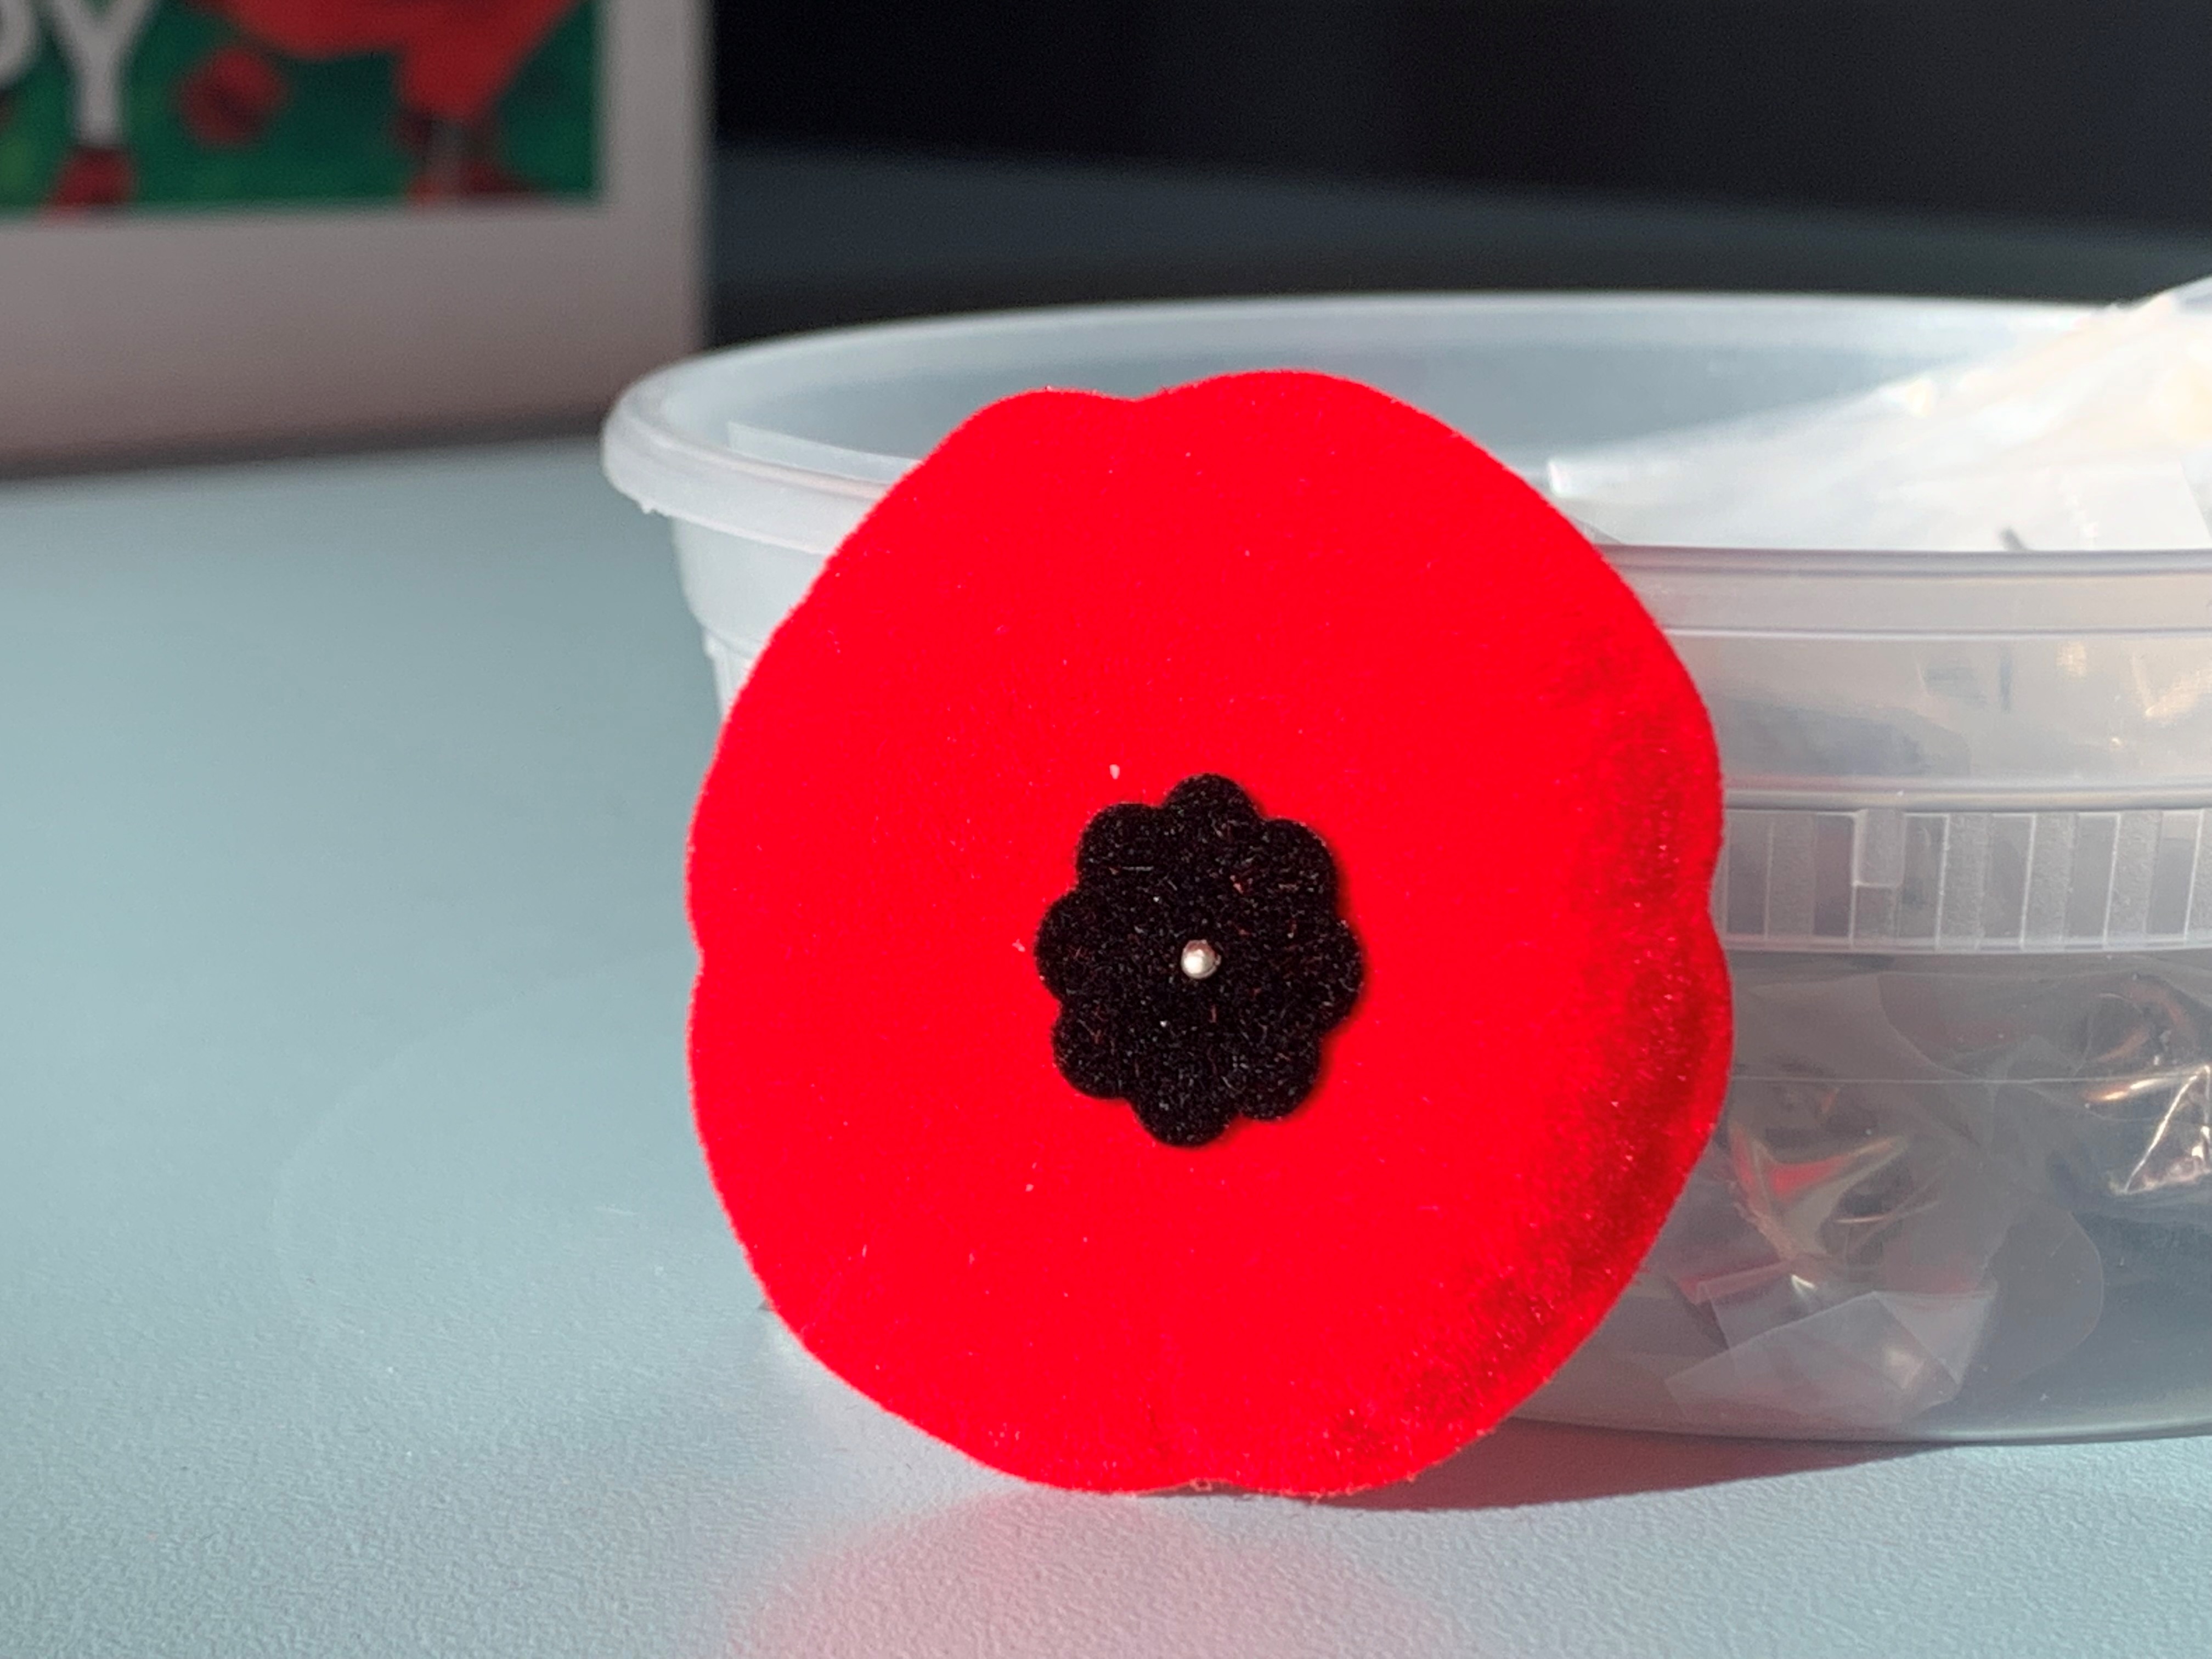 Schedules for Winnipeg Transit, city services on Remembrance Day